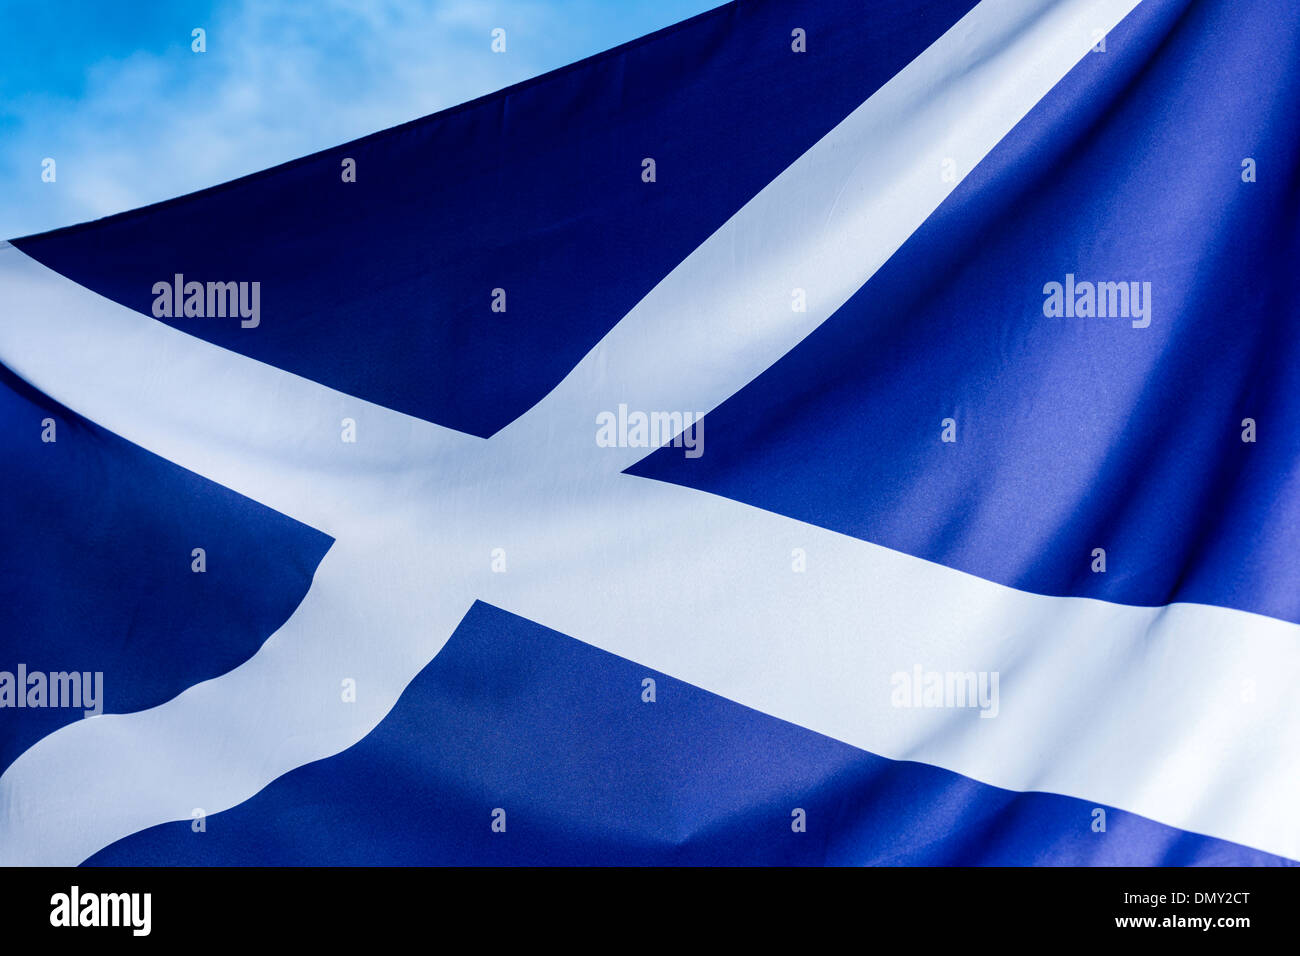 The Flag of Scotland, also known as the Cross of Saint Andrew, or Saltire. Stock Photo